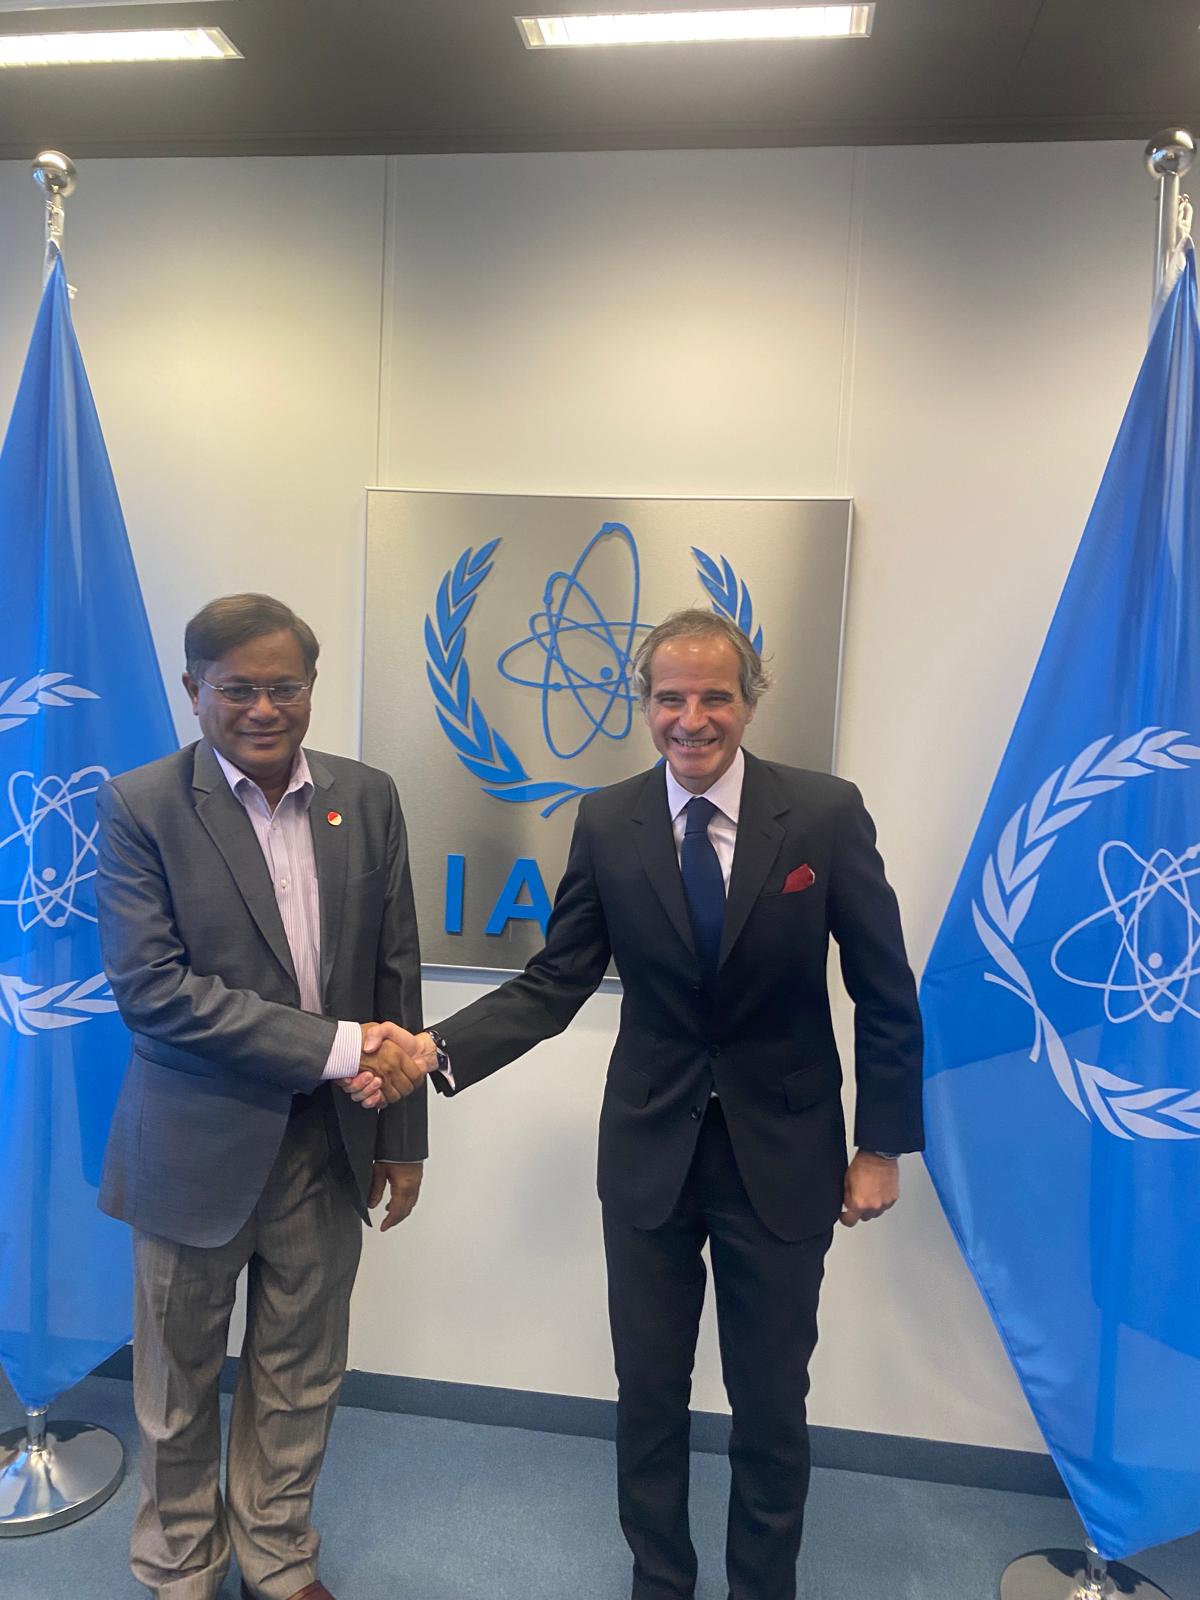 Bangladesh reaffirms commitment to nuclear non-proliferation and peaceful use